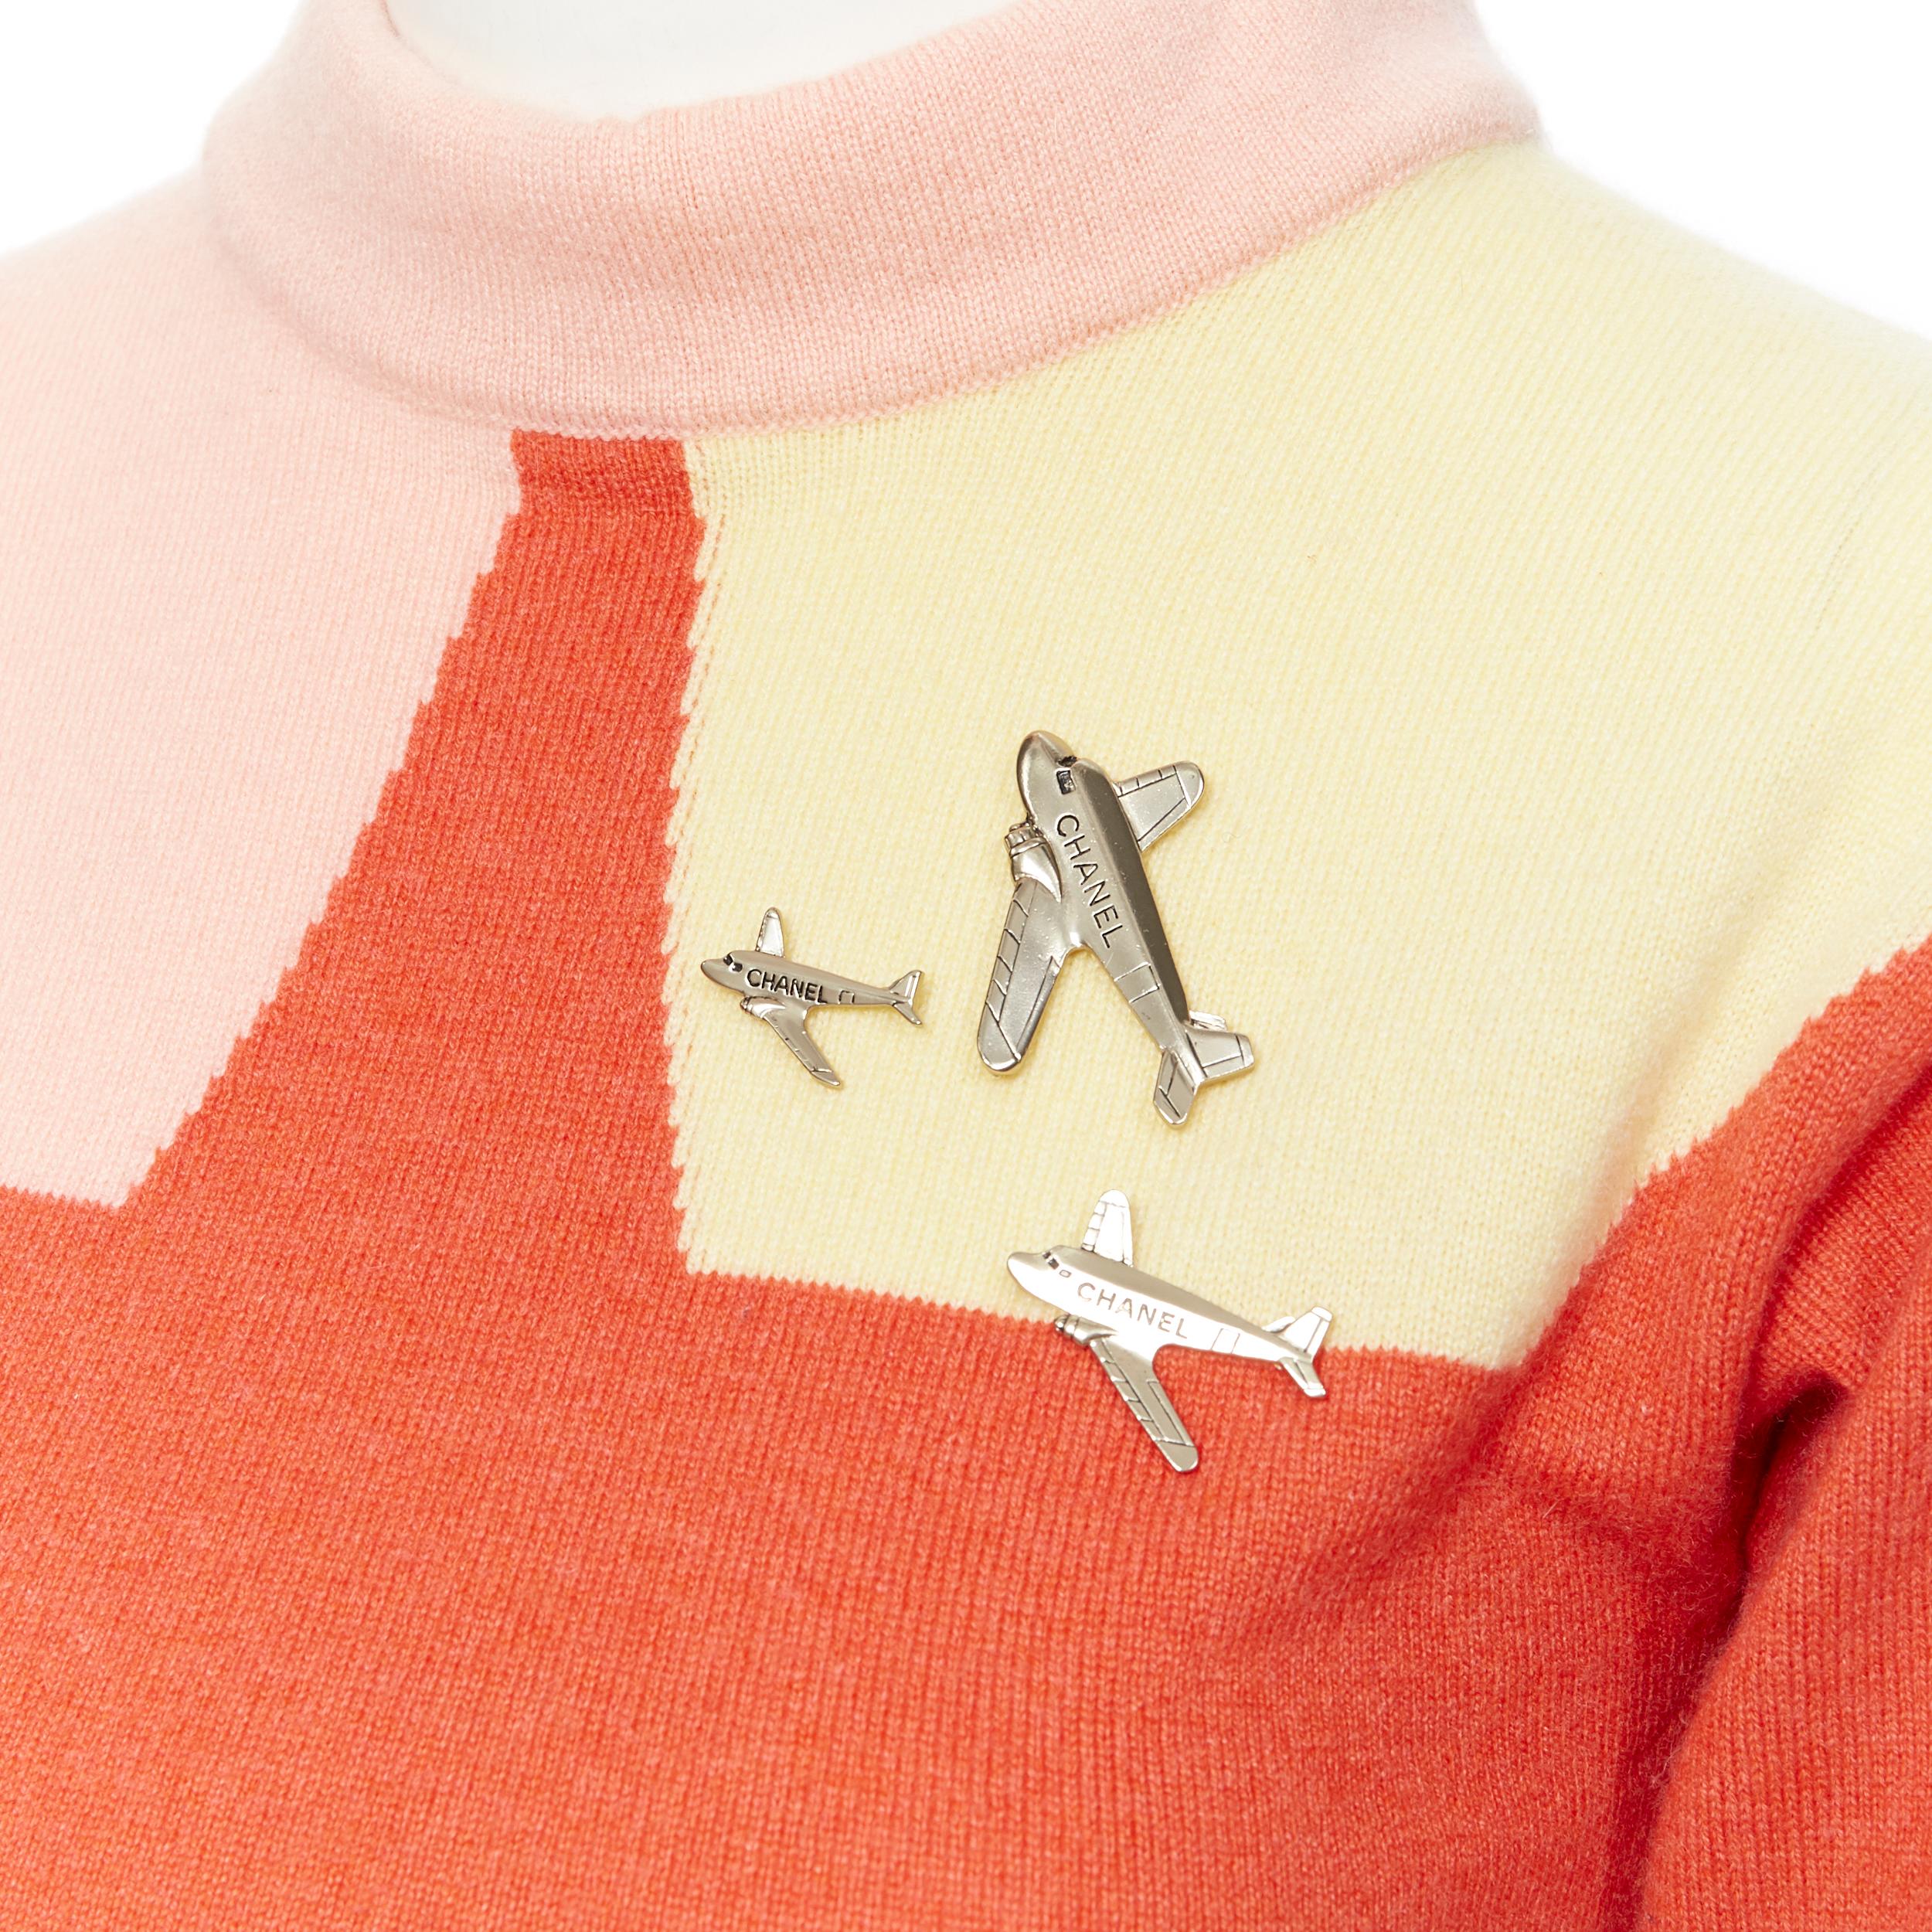 runway CHANEL 08C 100% cashmere orange colorblocked gold airplane sweater FR36
Brand: Chanel
Designer: Karl Lagerfeld
Collection: 08C
Model Name / Style: Cashmere sweater
Material: Cashmere
Color: Orange
Pattern: Geometric
Extra Detail: Gold-tone